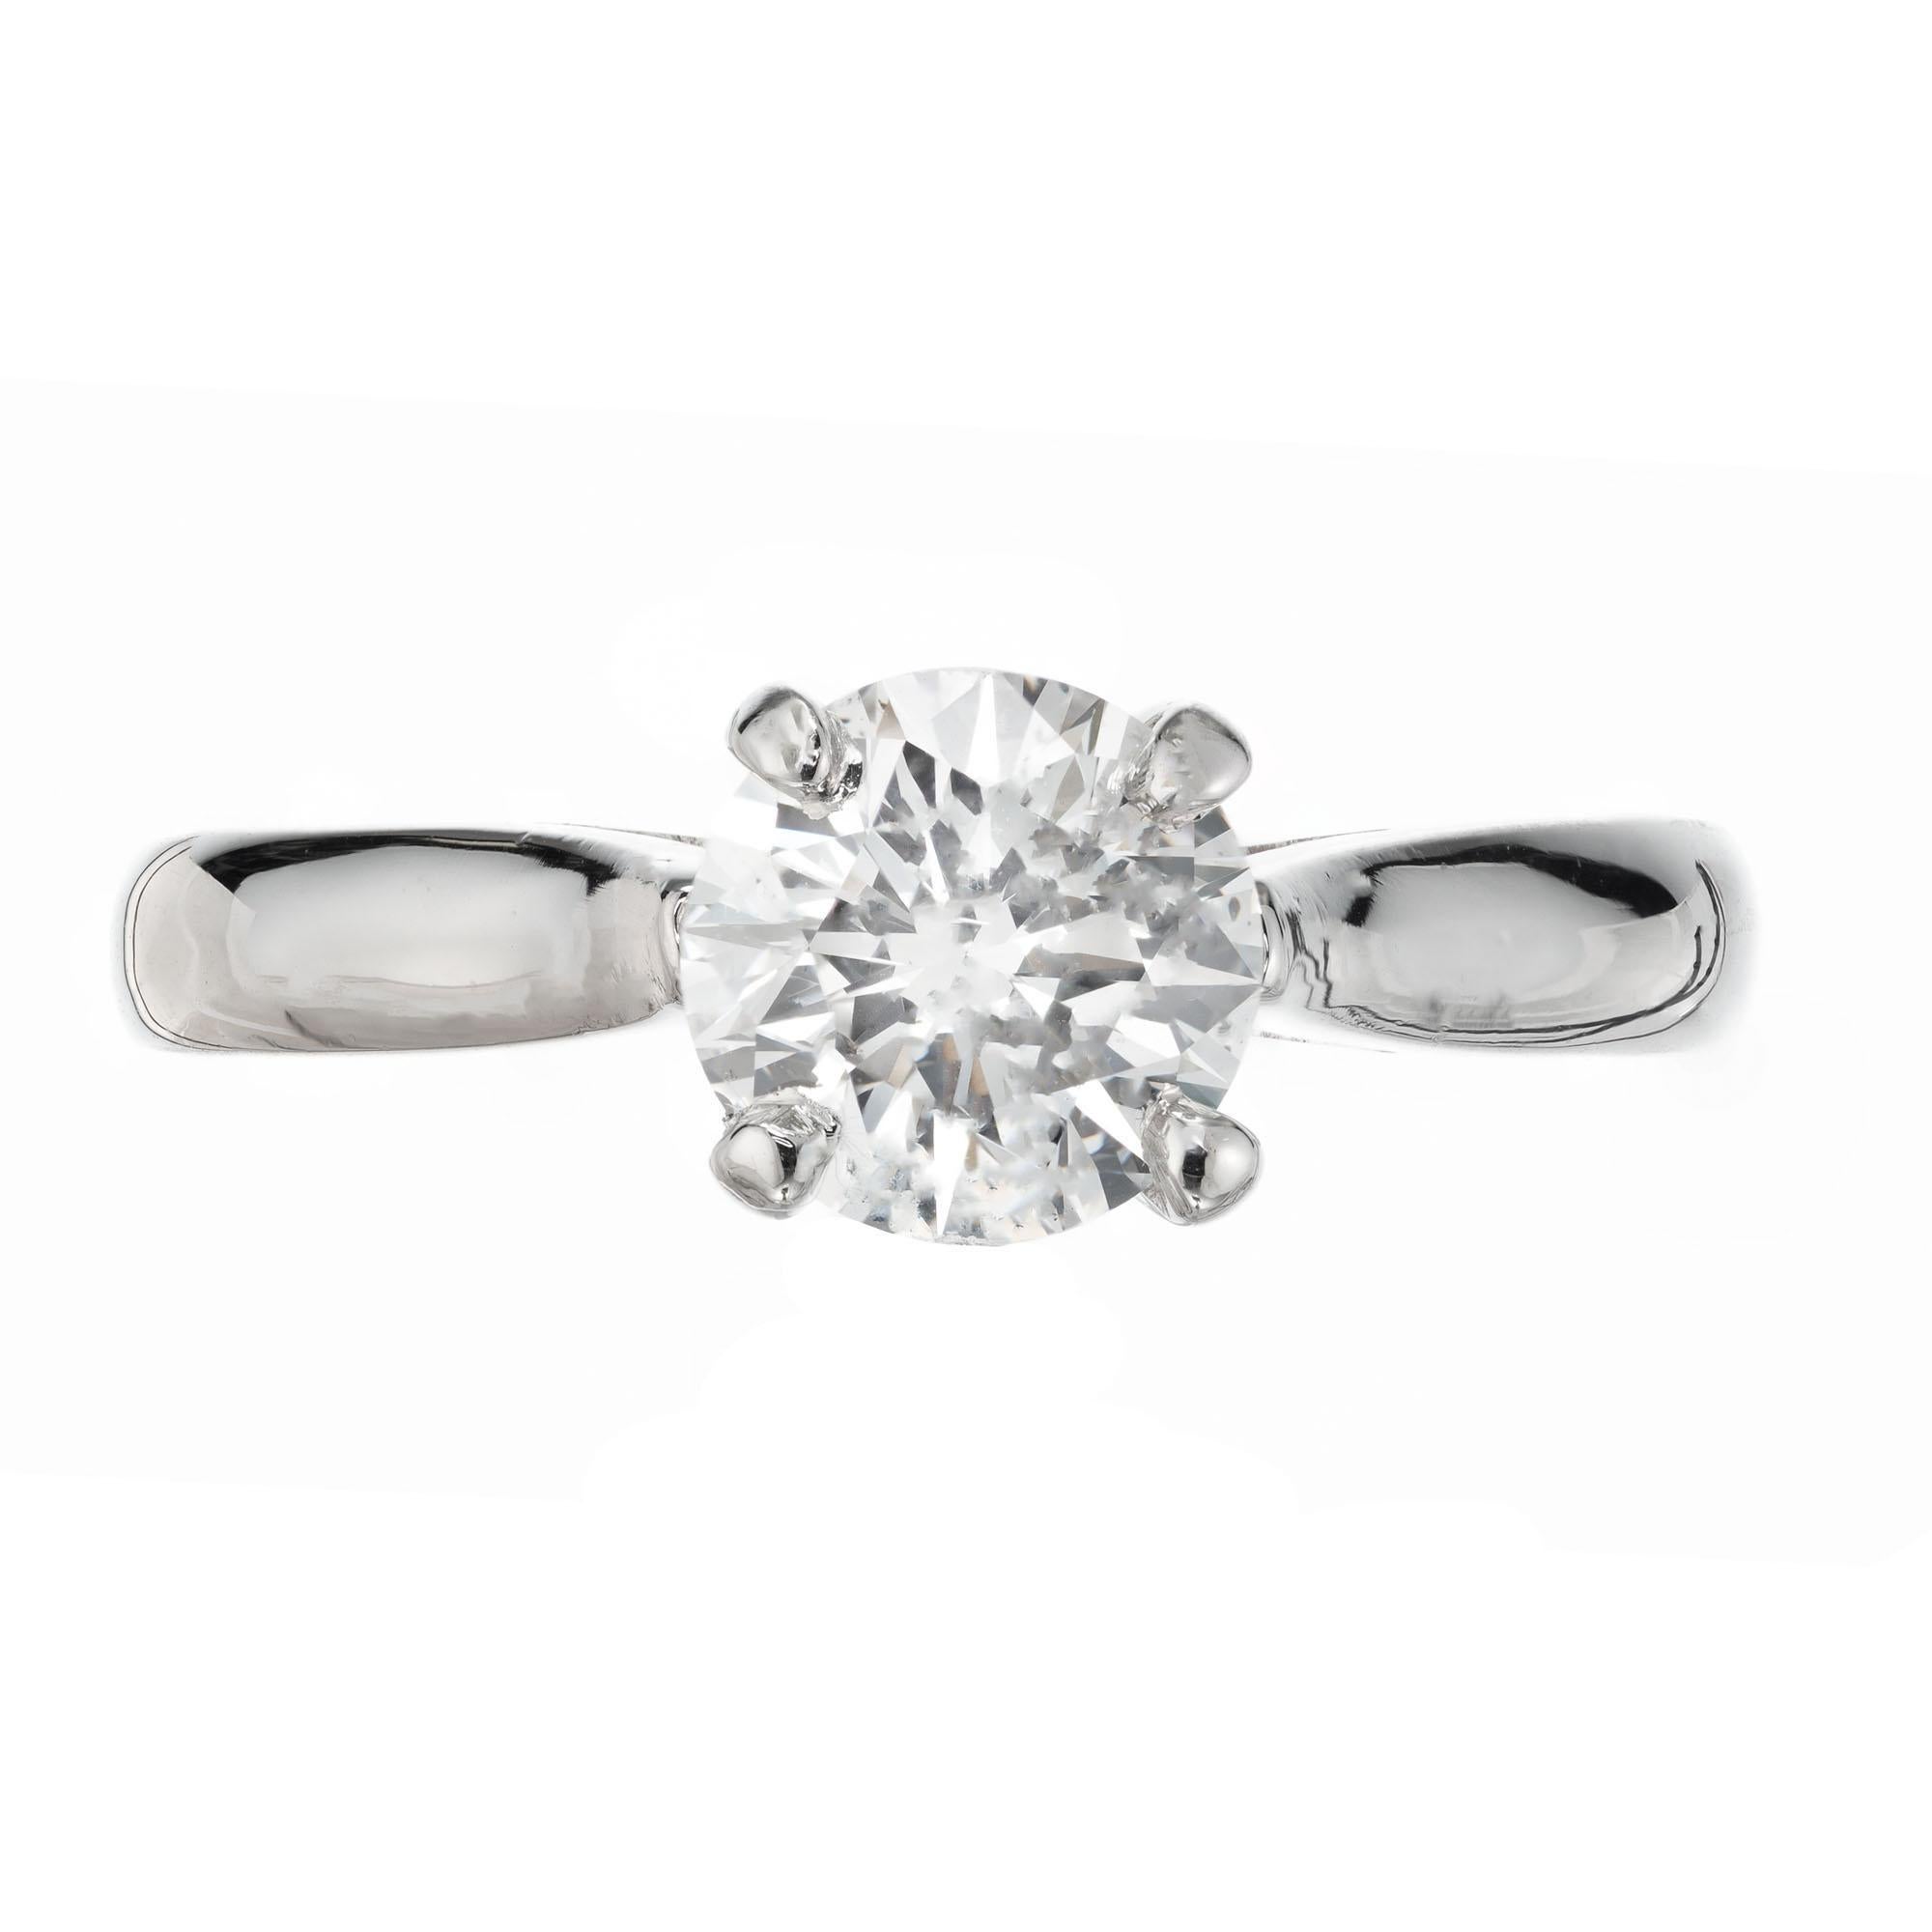 GIA certified 1.09 carat round brilliant cut diamond solitaire engagement ring, set in a classic platinum setting from the Peter Suchy Workshop. 

1 round brilliant cut diamond, H SI2 approx. 1.09cts GIA # 6204913131
Size 6.5 and sizable
Platinum